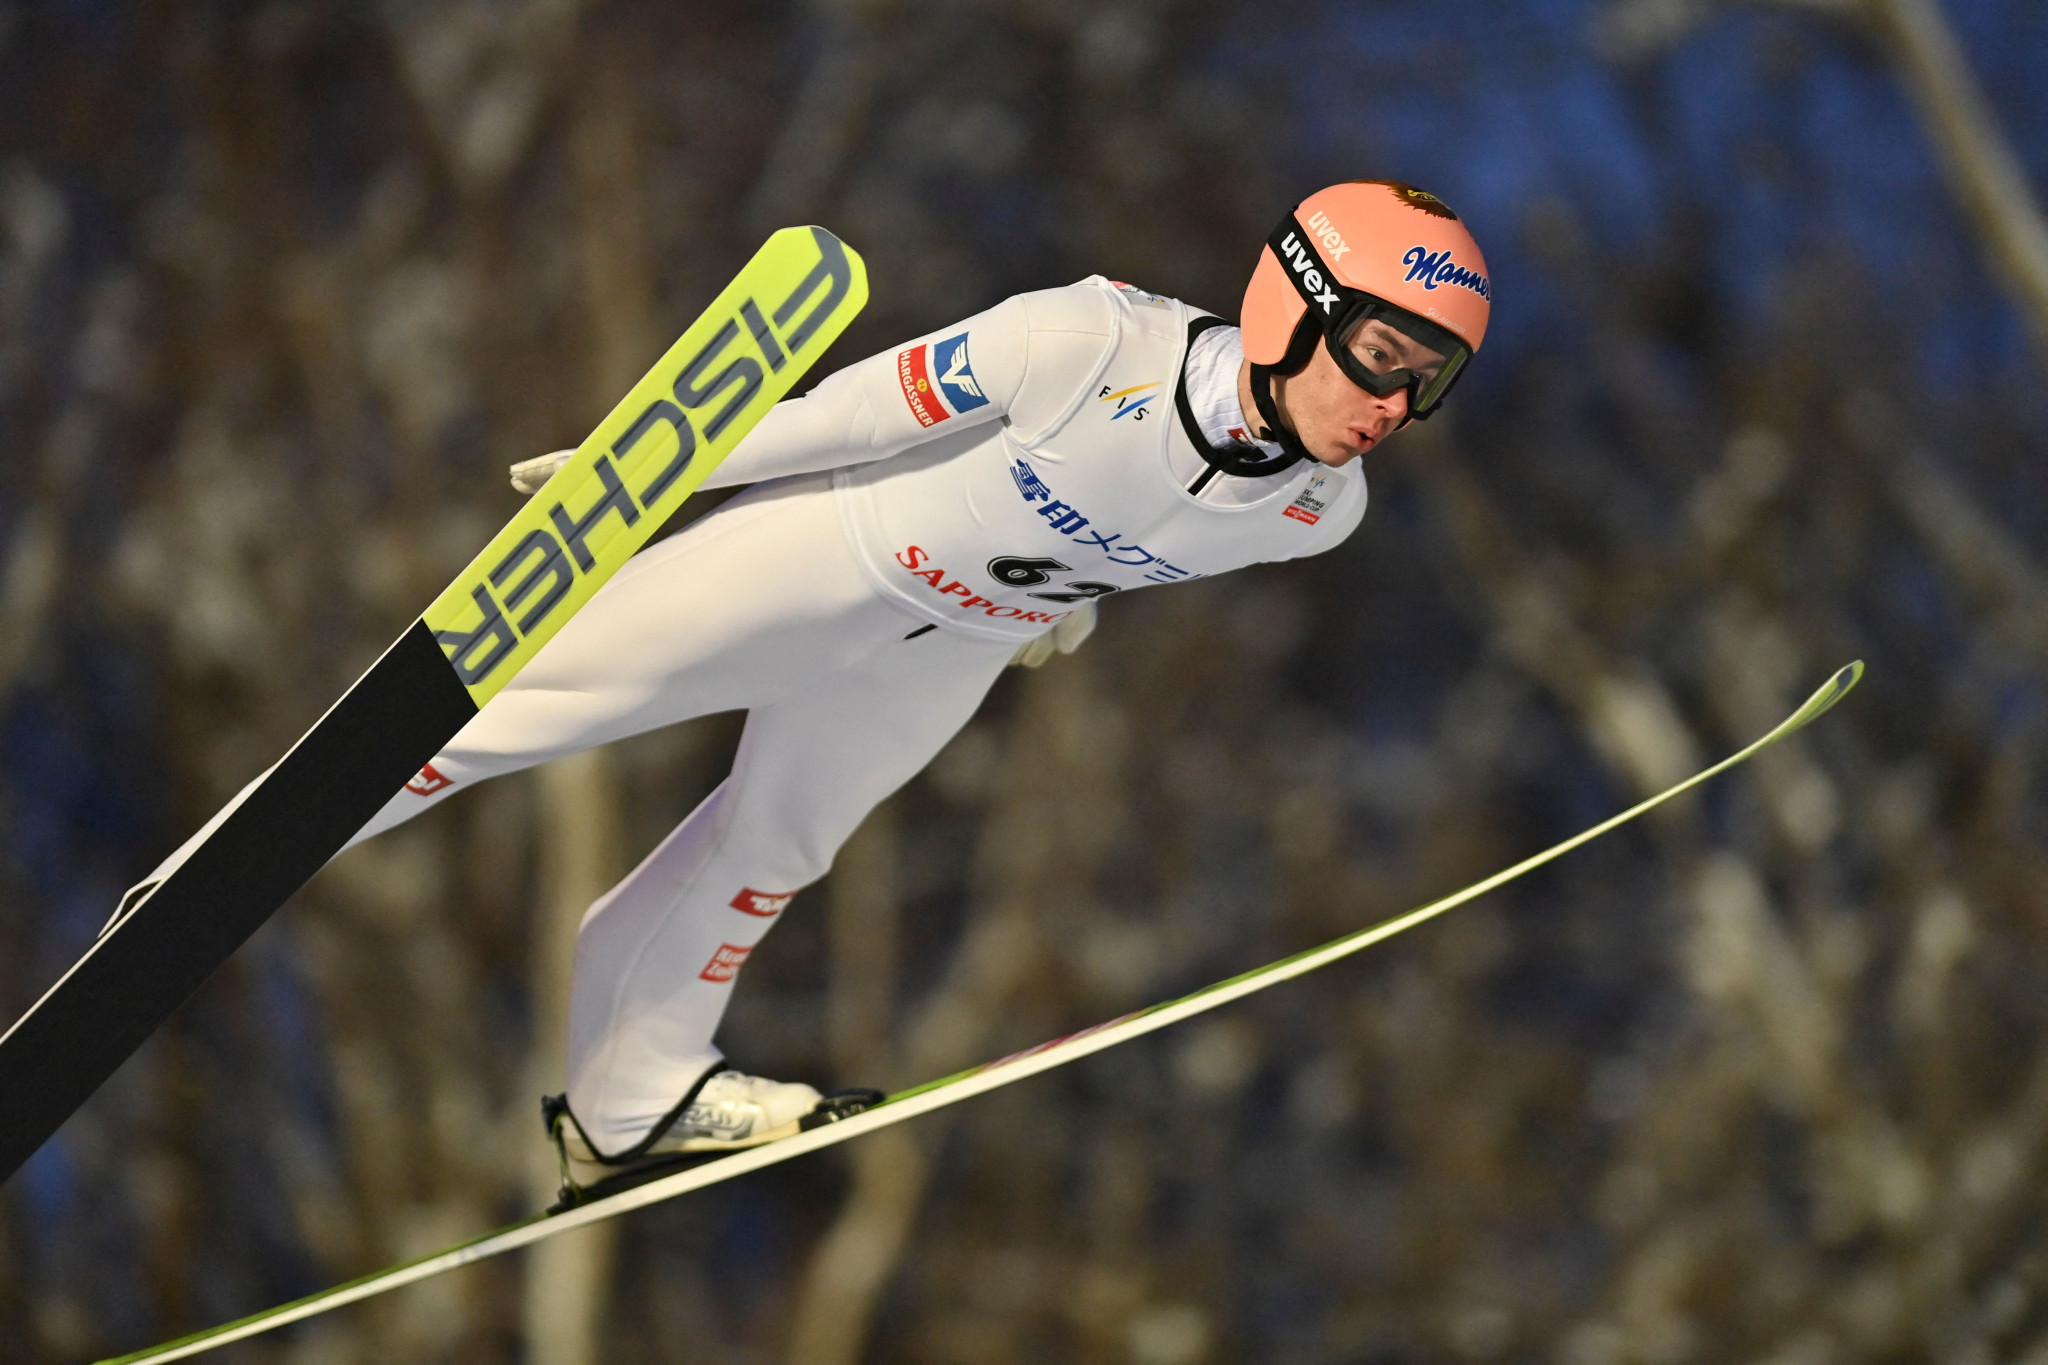 Kraft upgrades to gold in second FIS Ski Jumping World Cup in Sapporo